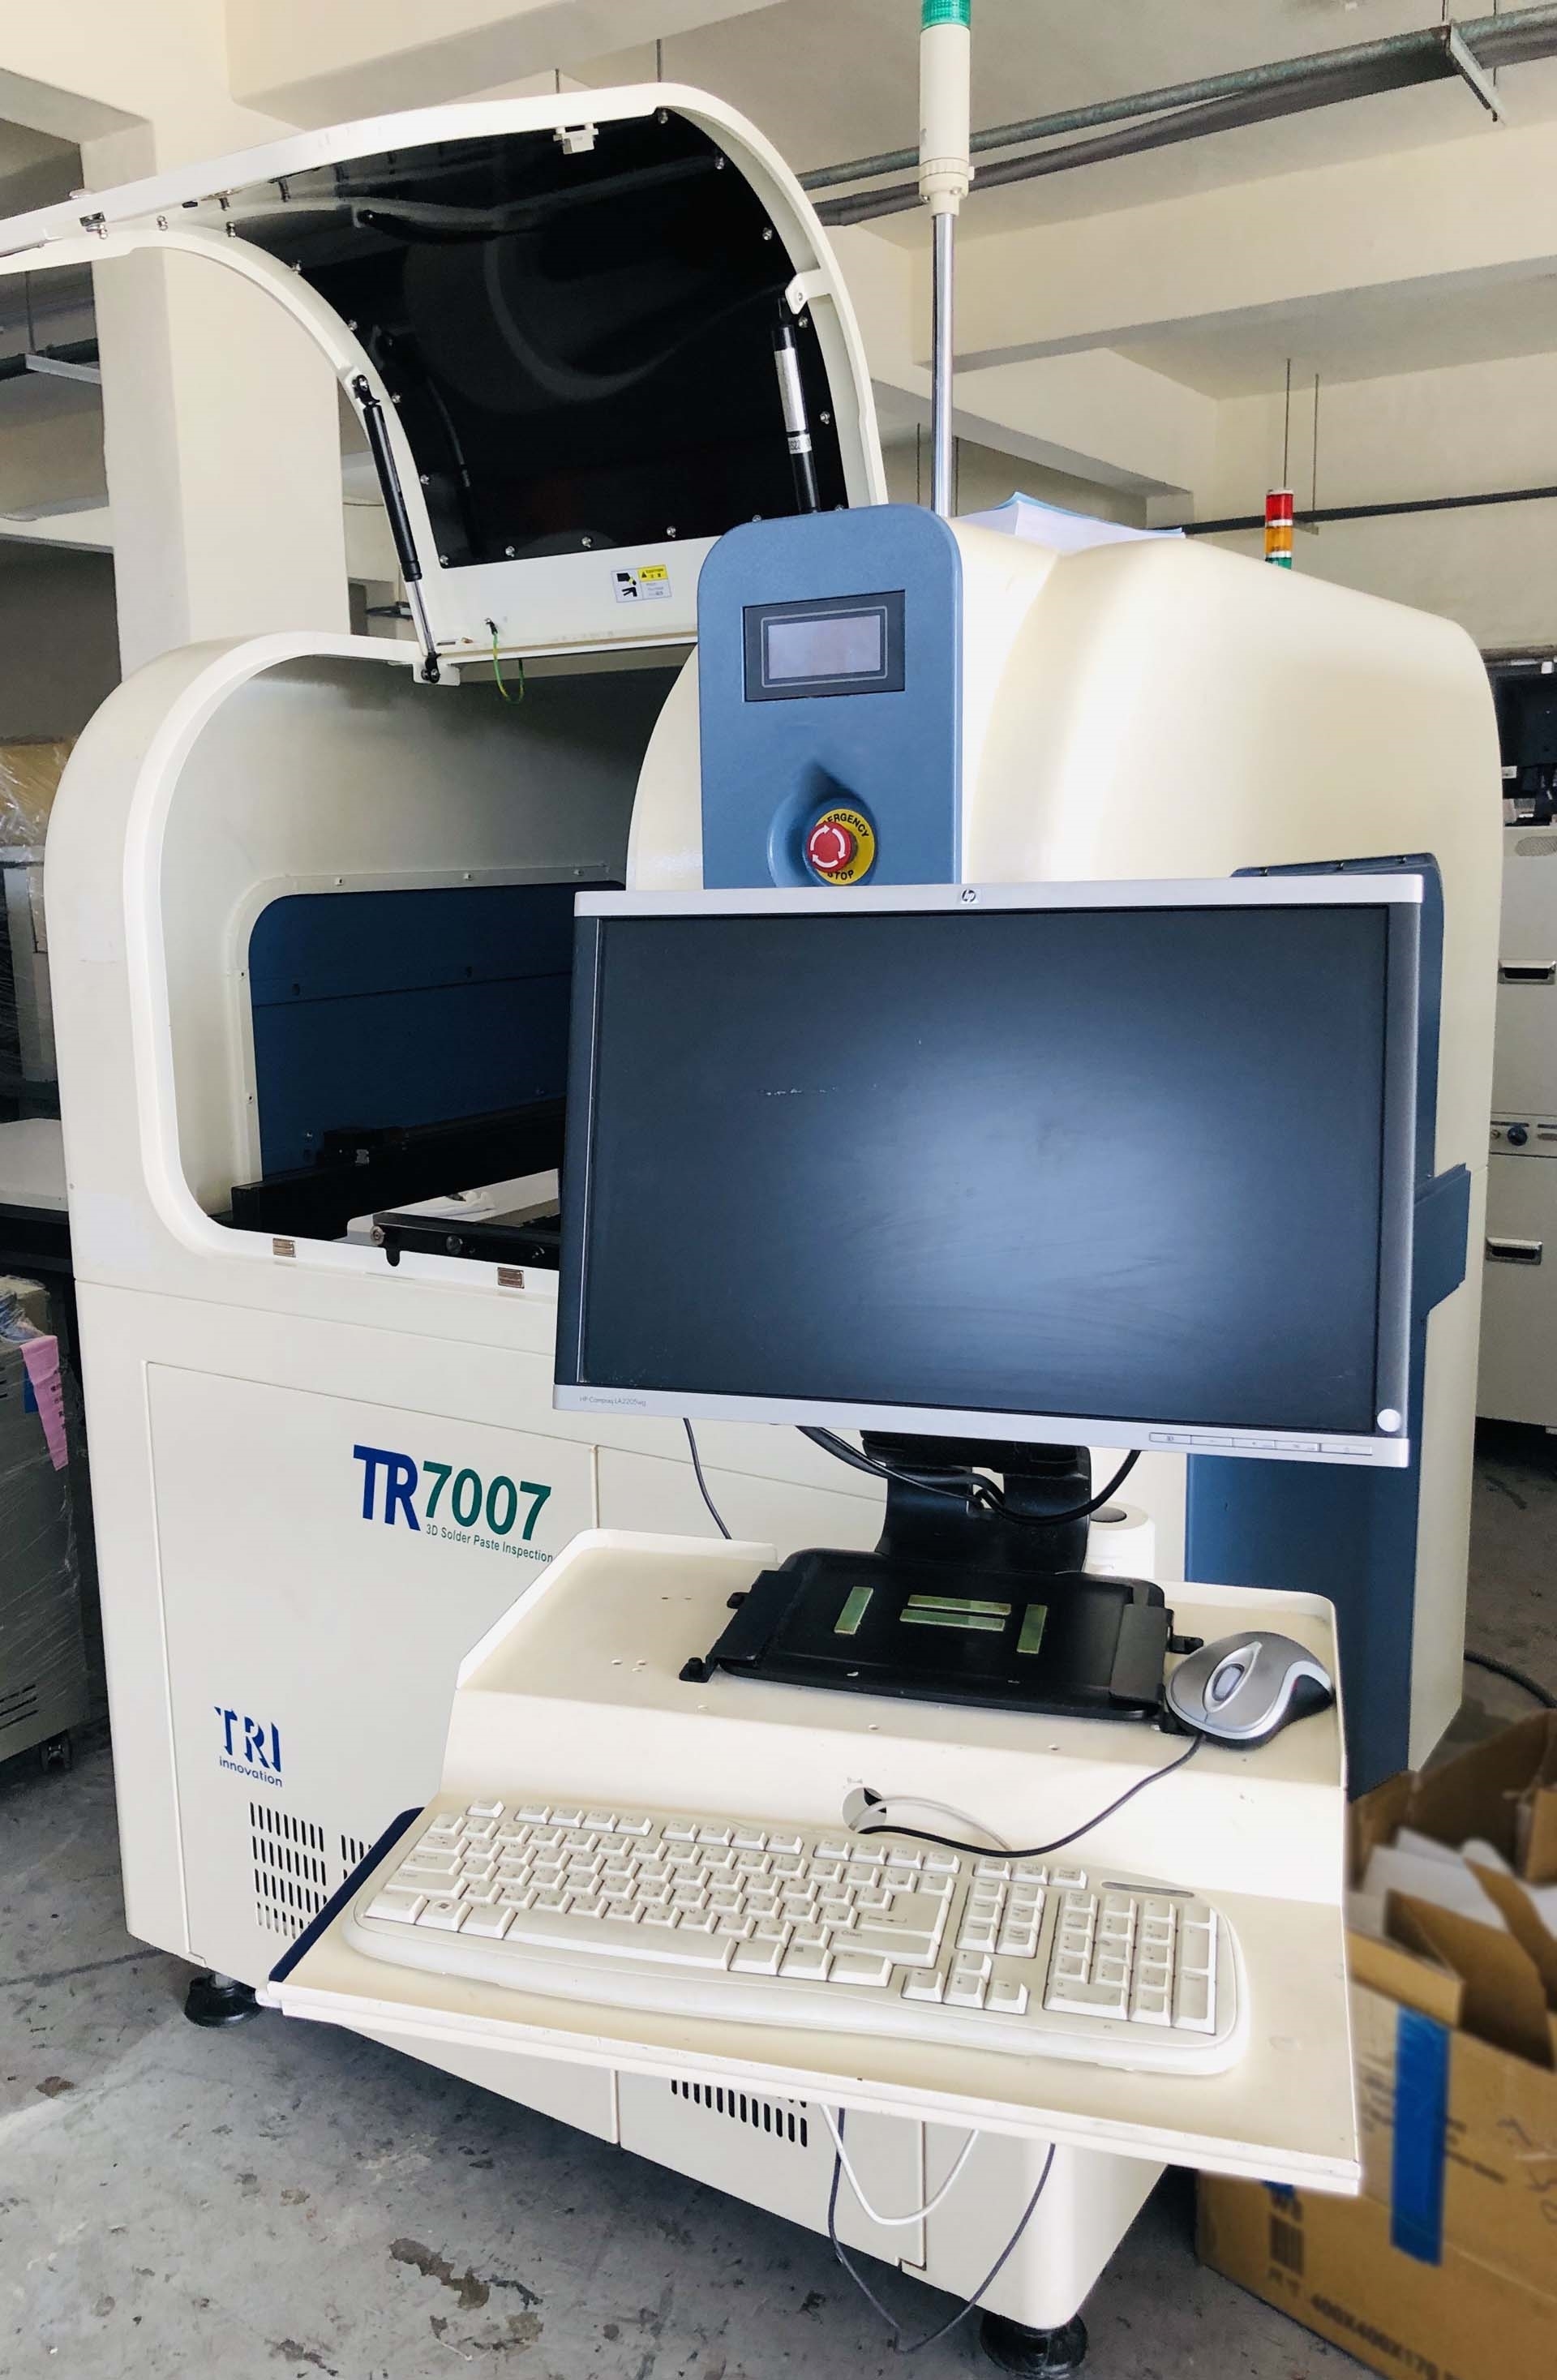 Photo Used TRI TR7007 For Sale